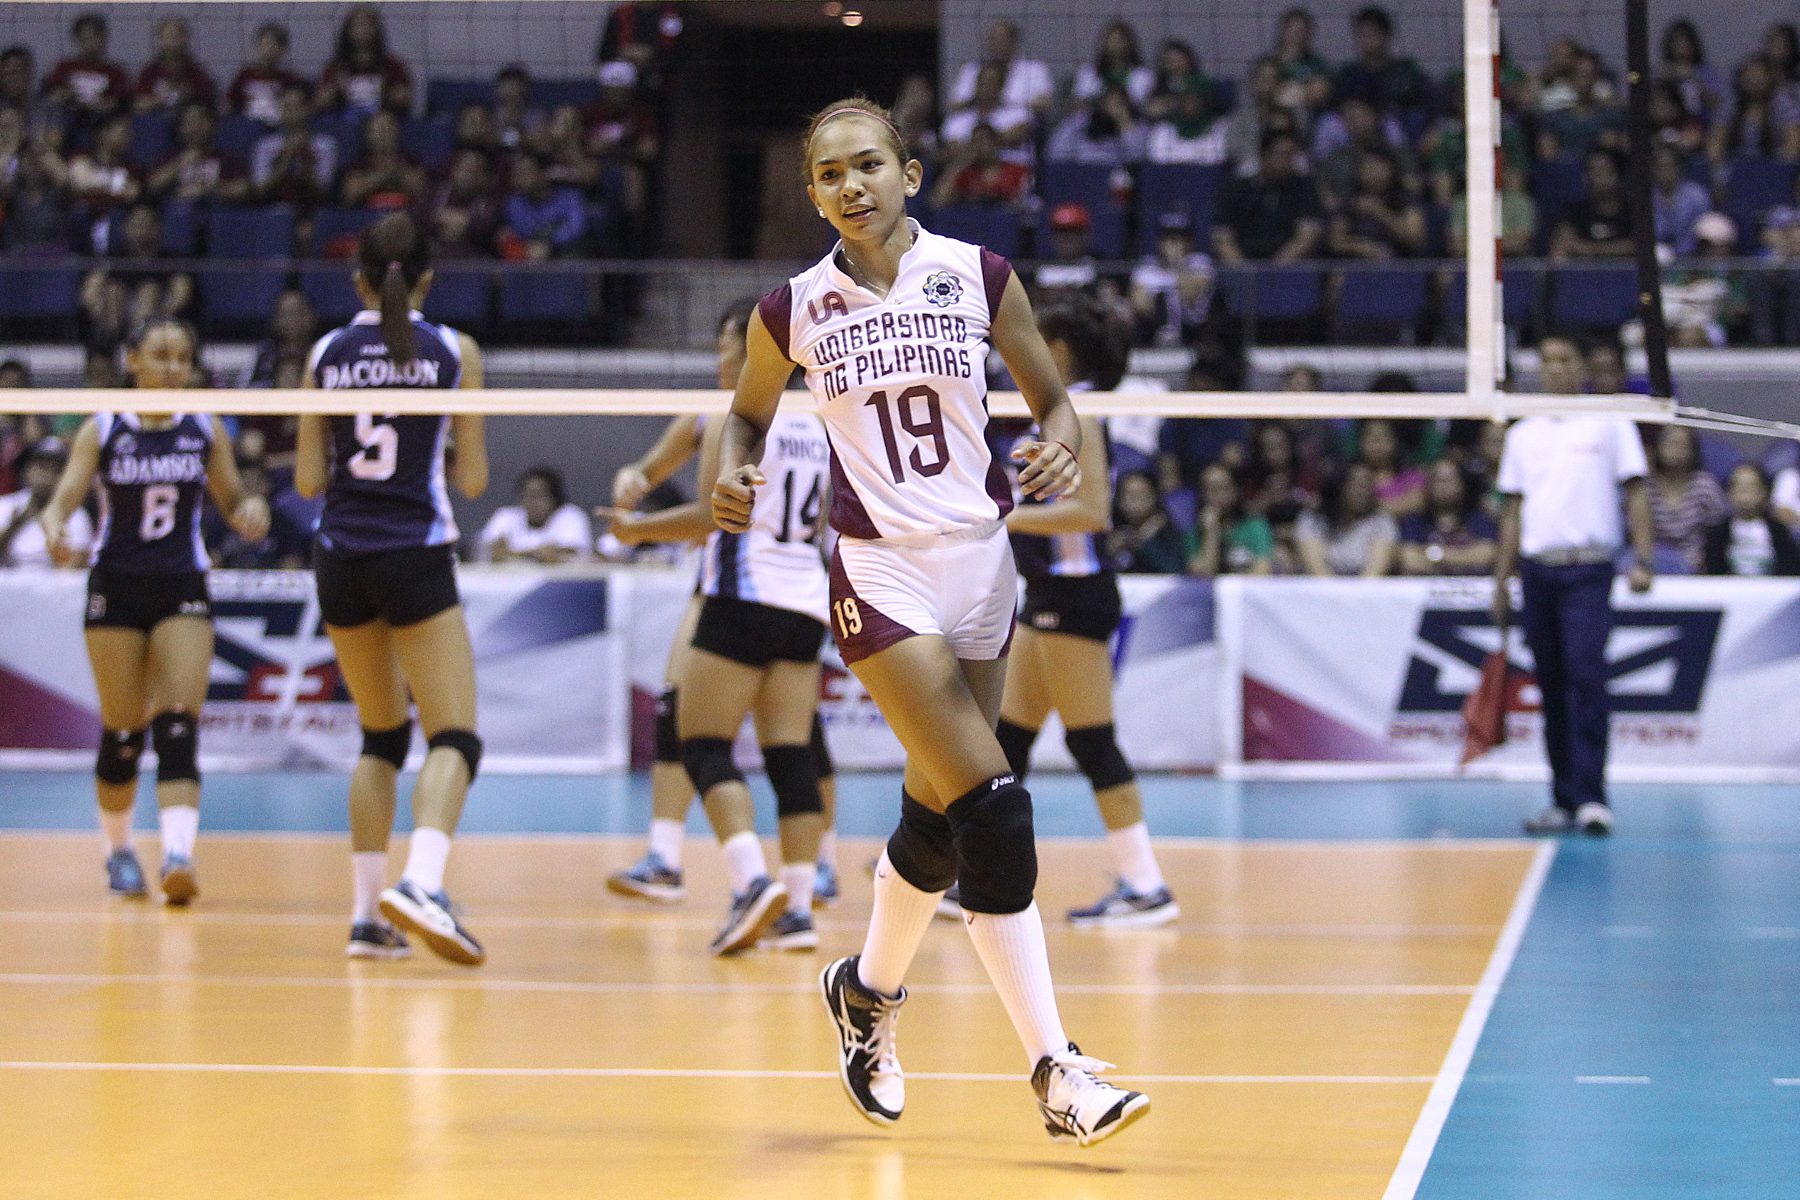 UP Lady Maroons make quick work of Adamson in bounce back victory